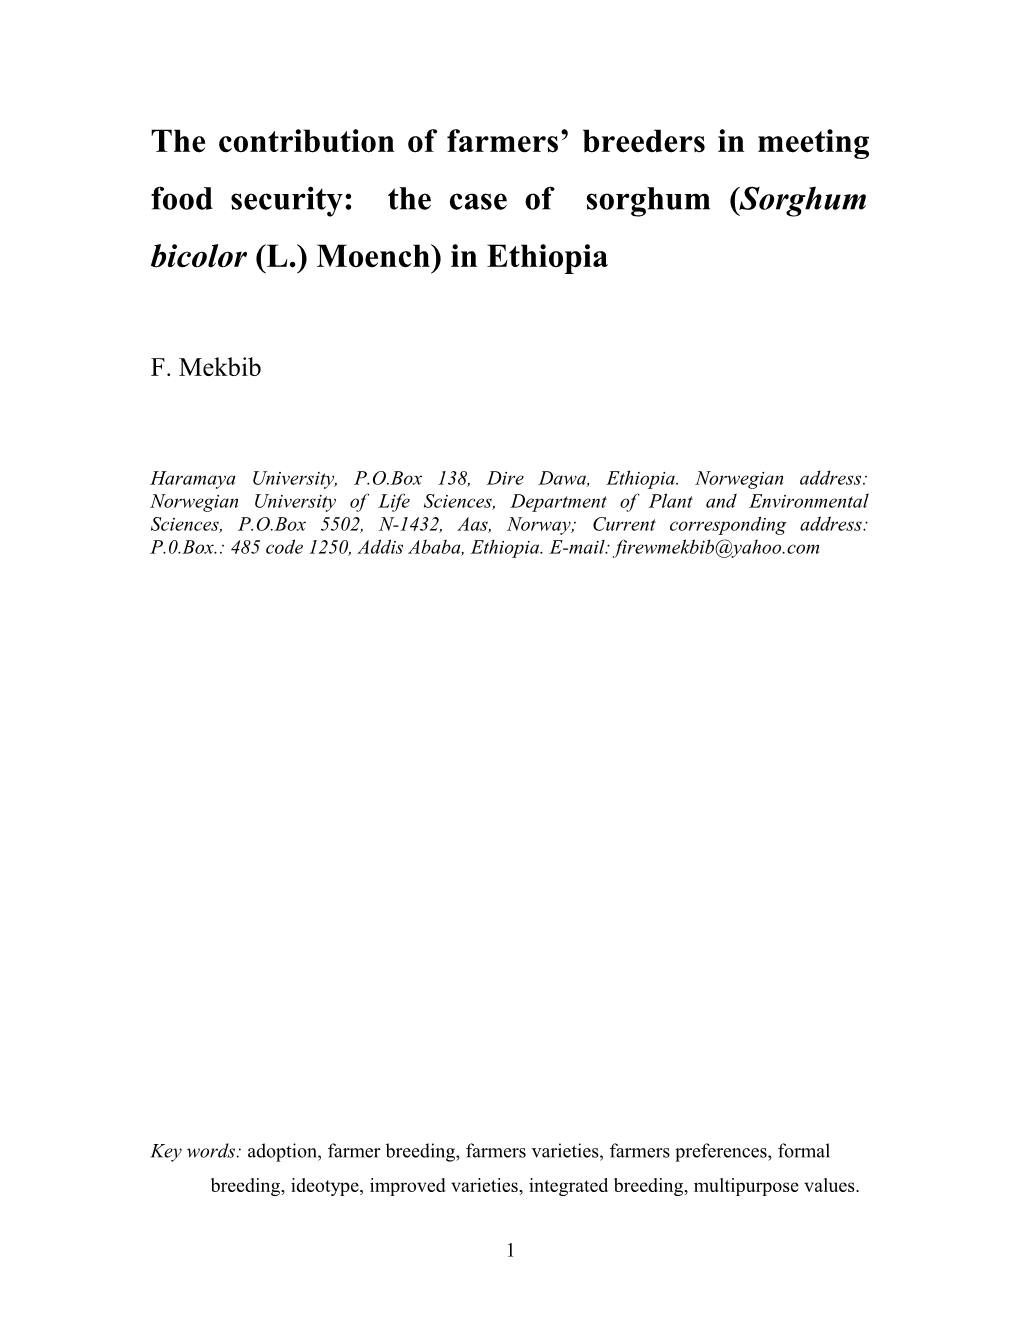 The Contribution of Farmers Breeders in Meeting Food Security: the Case of Sorghum (Sorghum